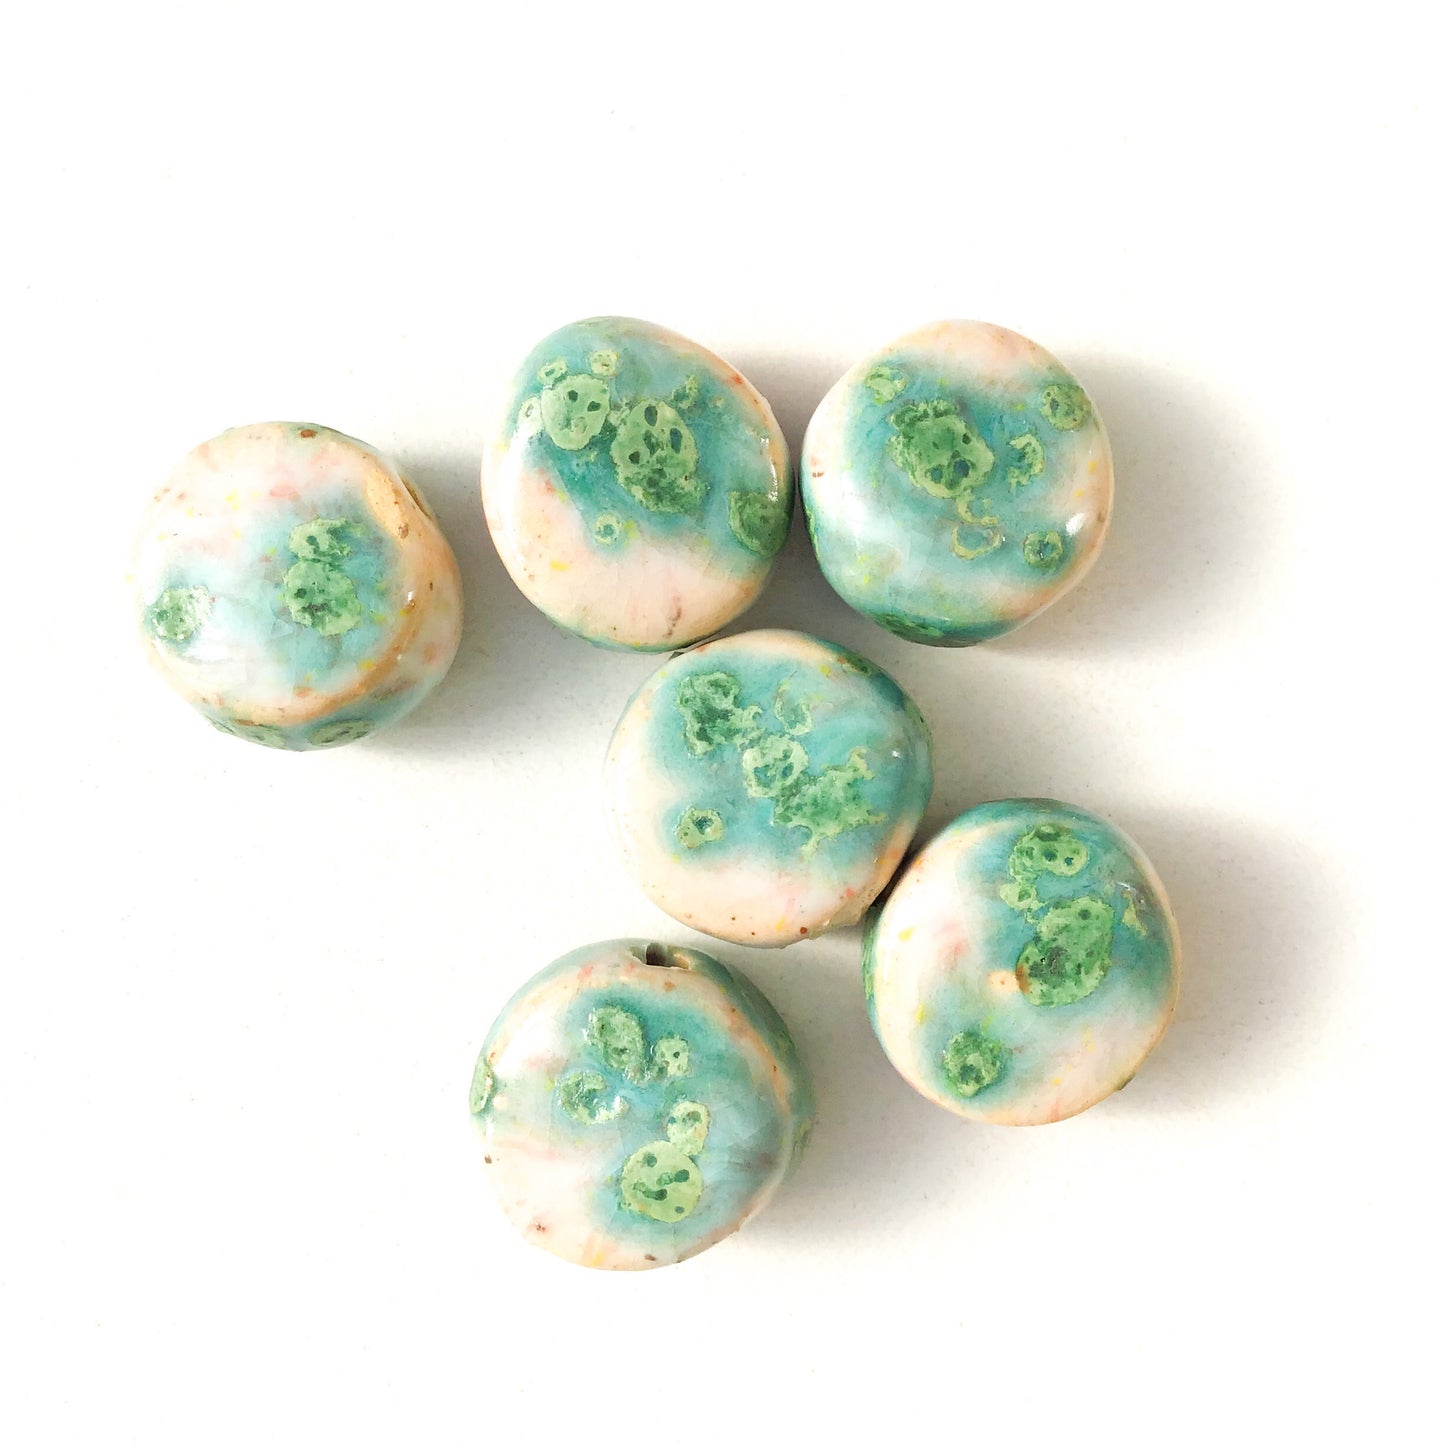 Round Handmade Clay Beads - Turquoise, White, and Ocean Blue Ceramic Beads - 9/16" x 1/4"